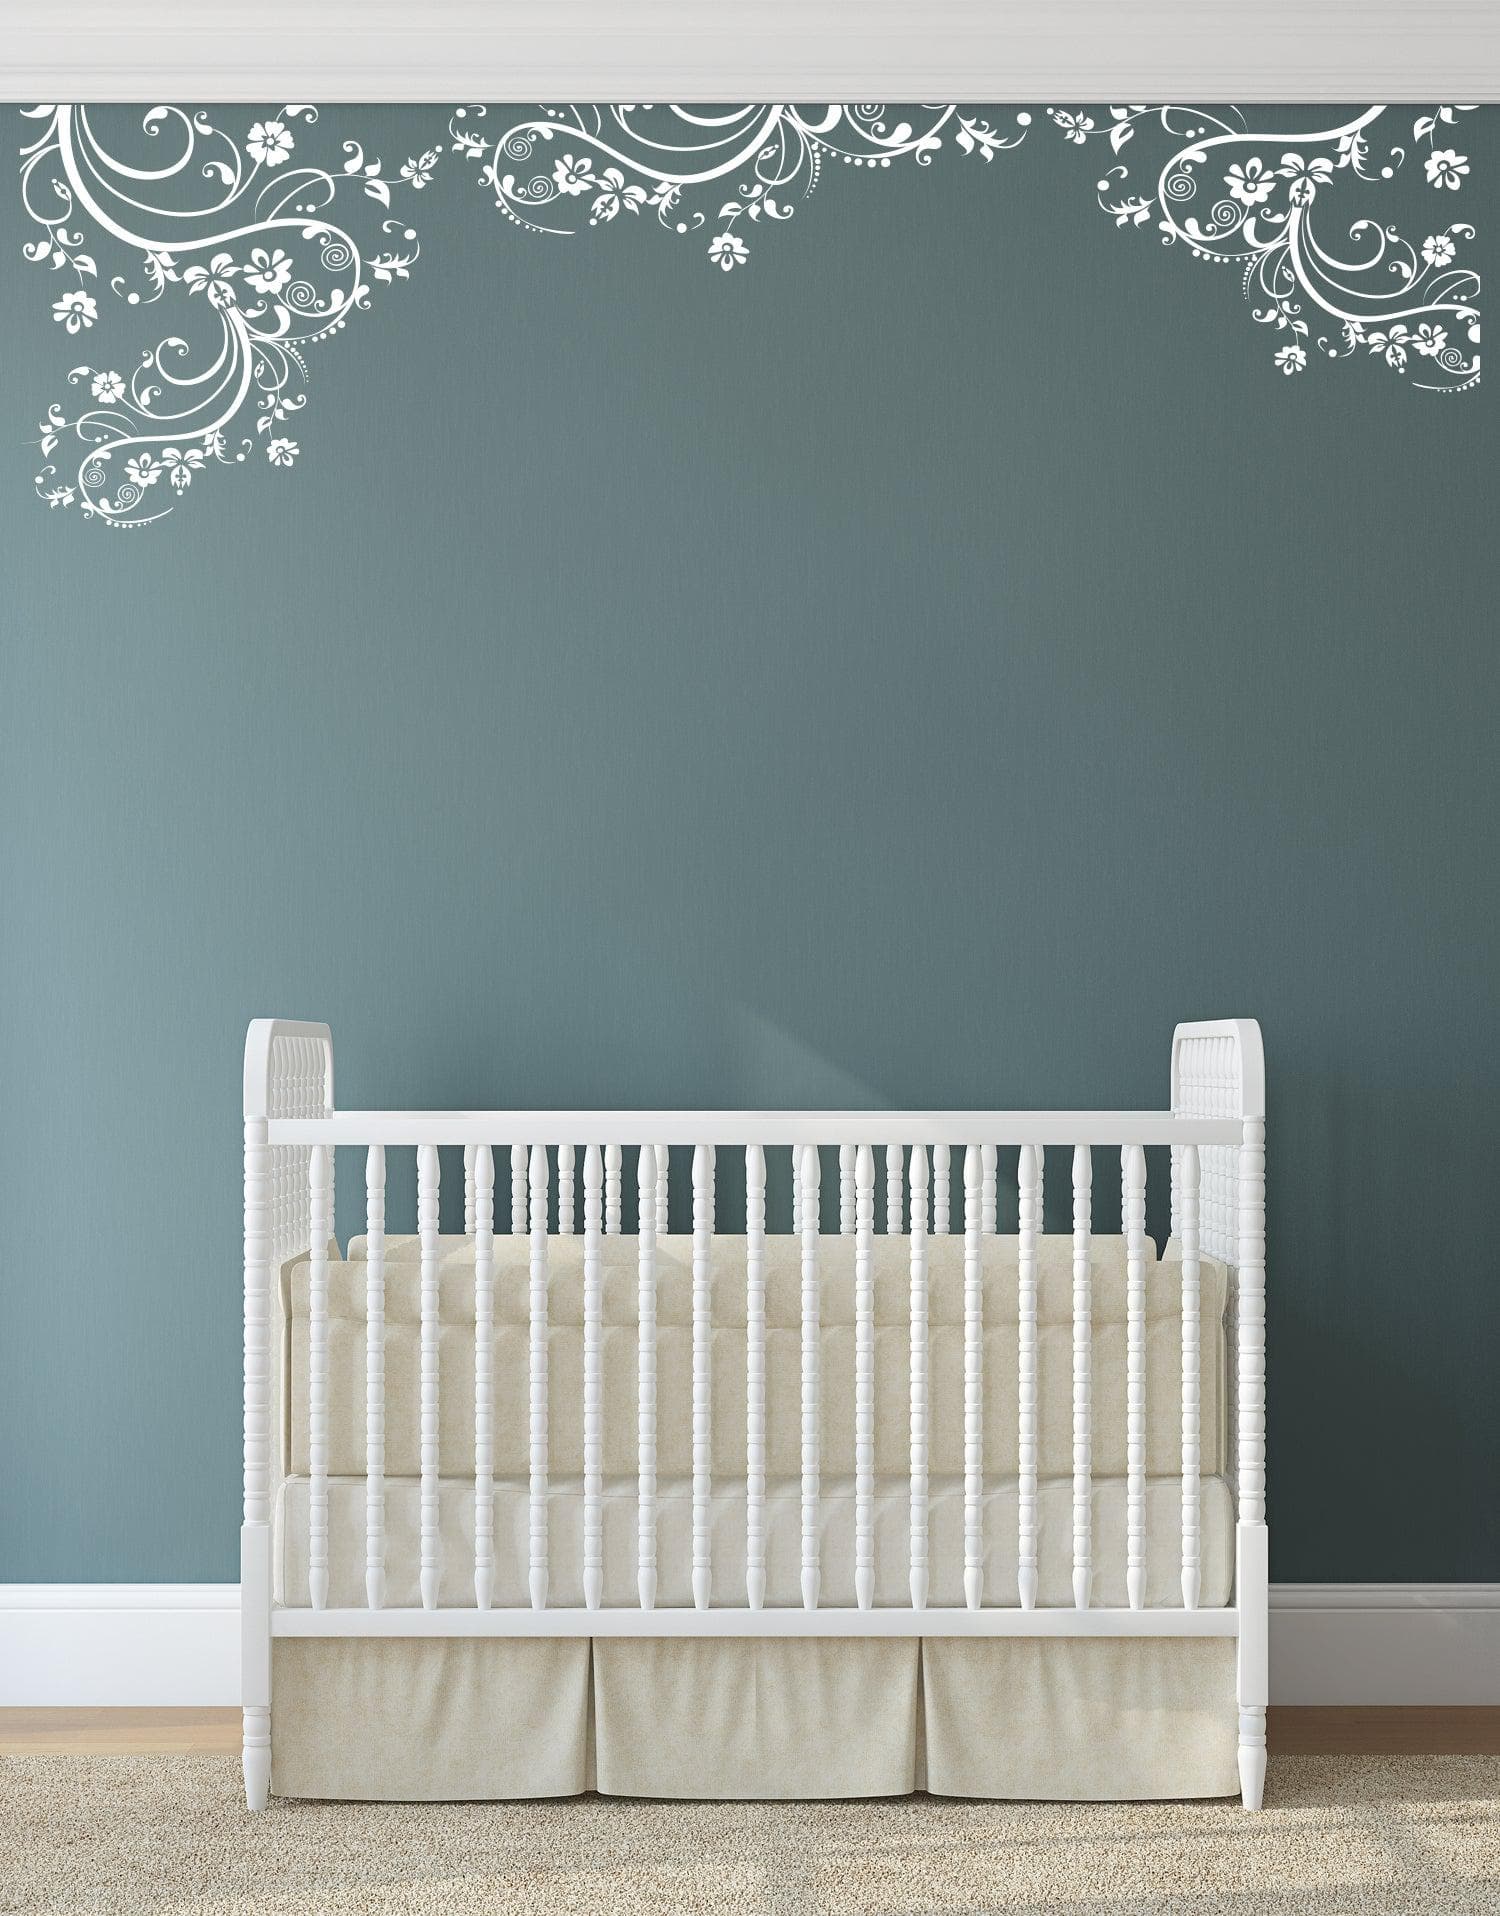 White swirling floral decals on a blue gray wall above a crib.